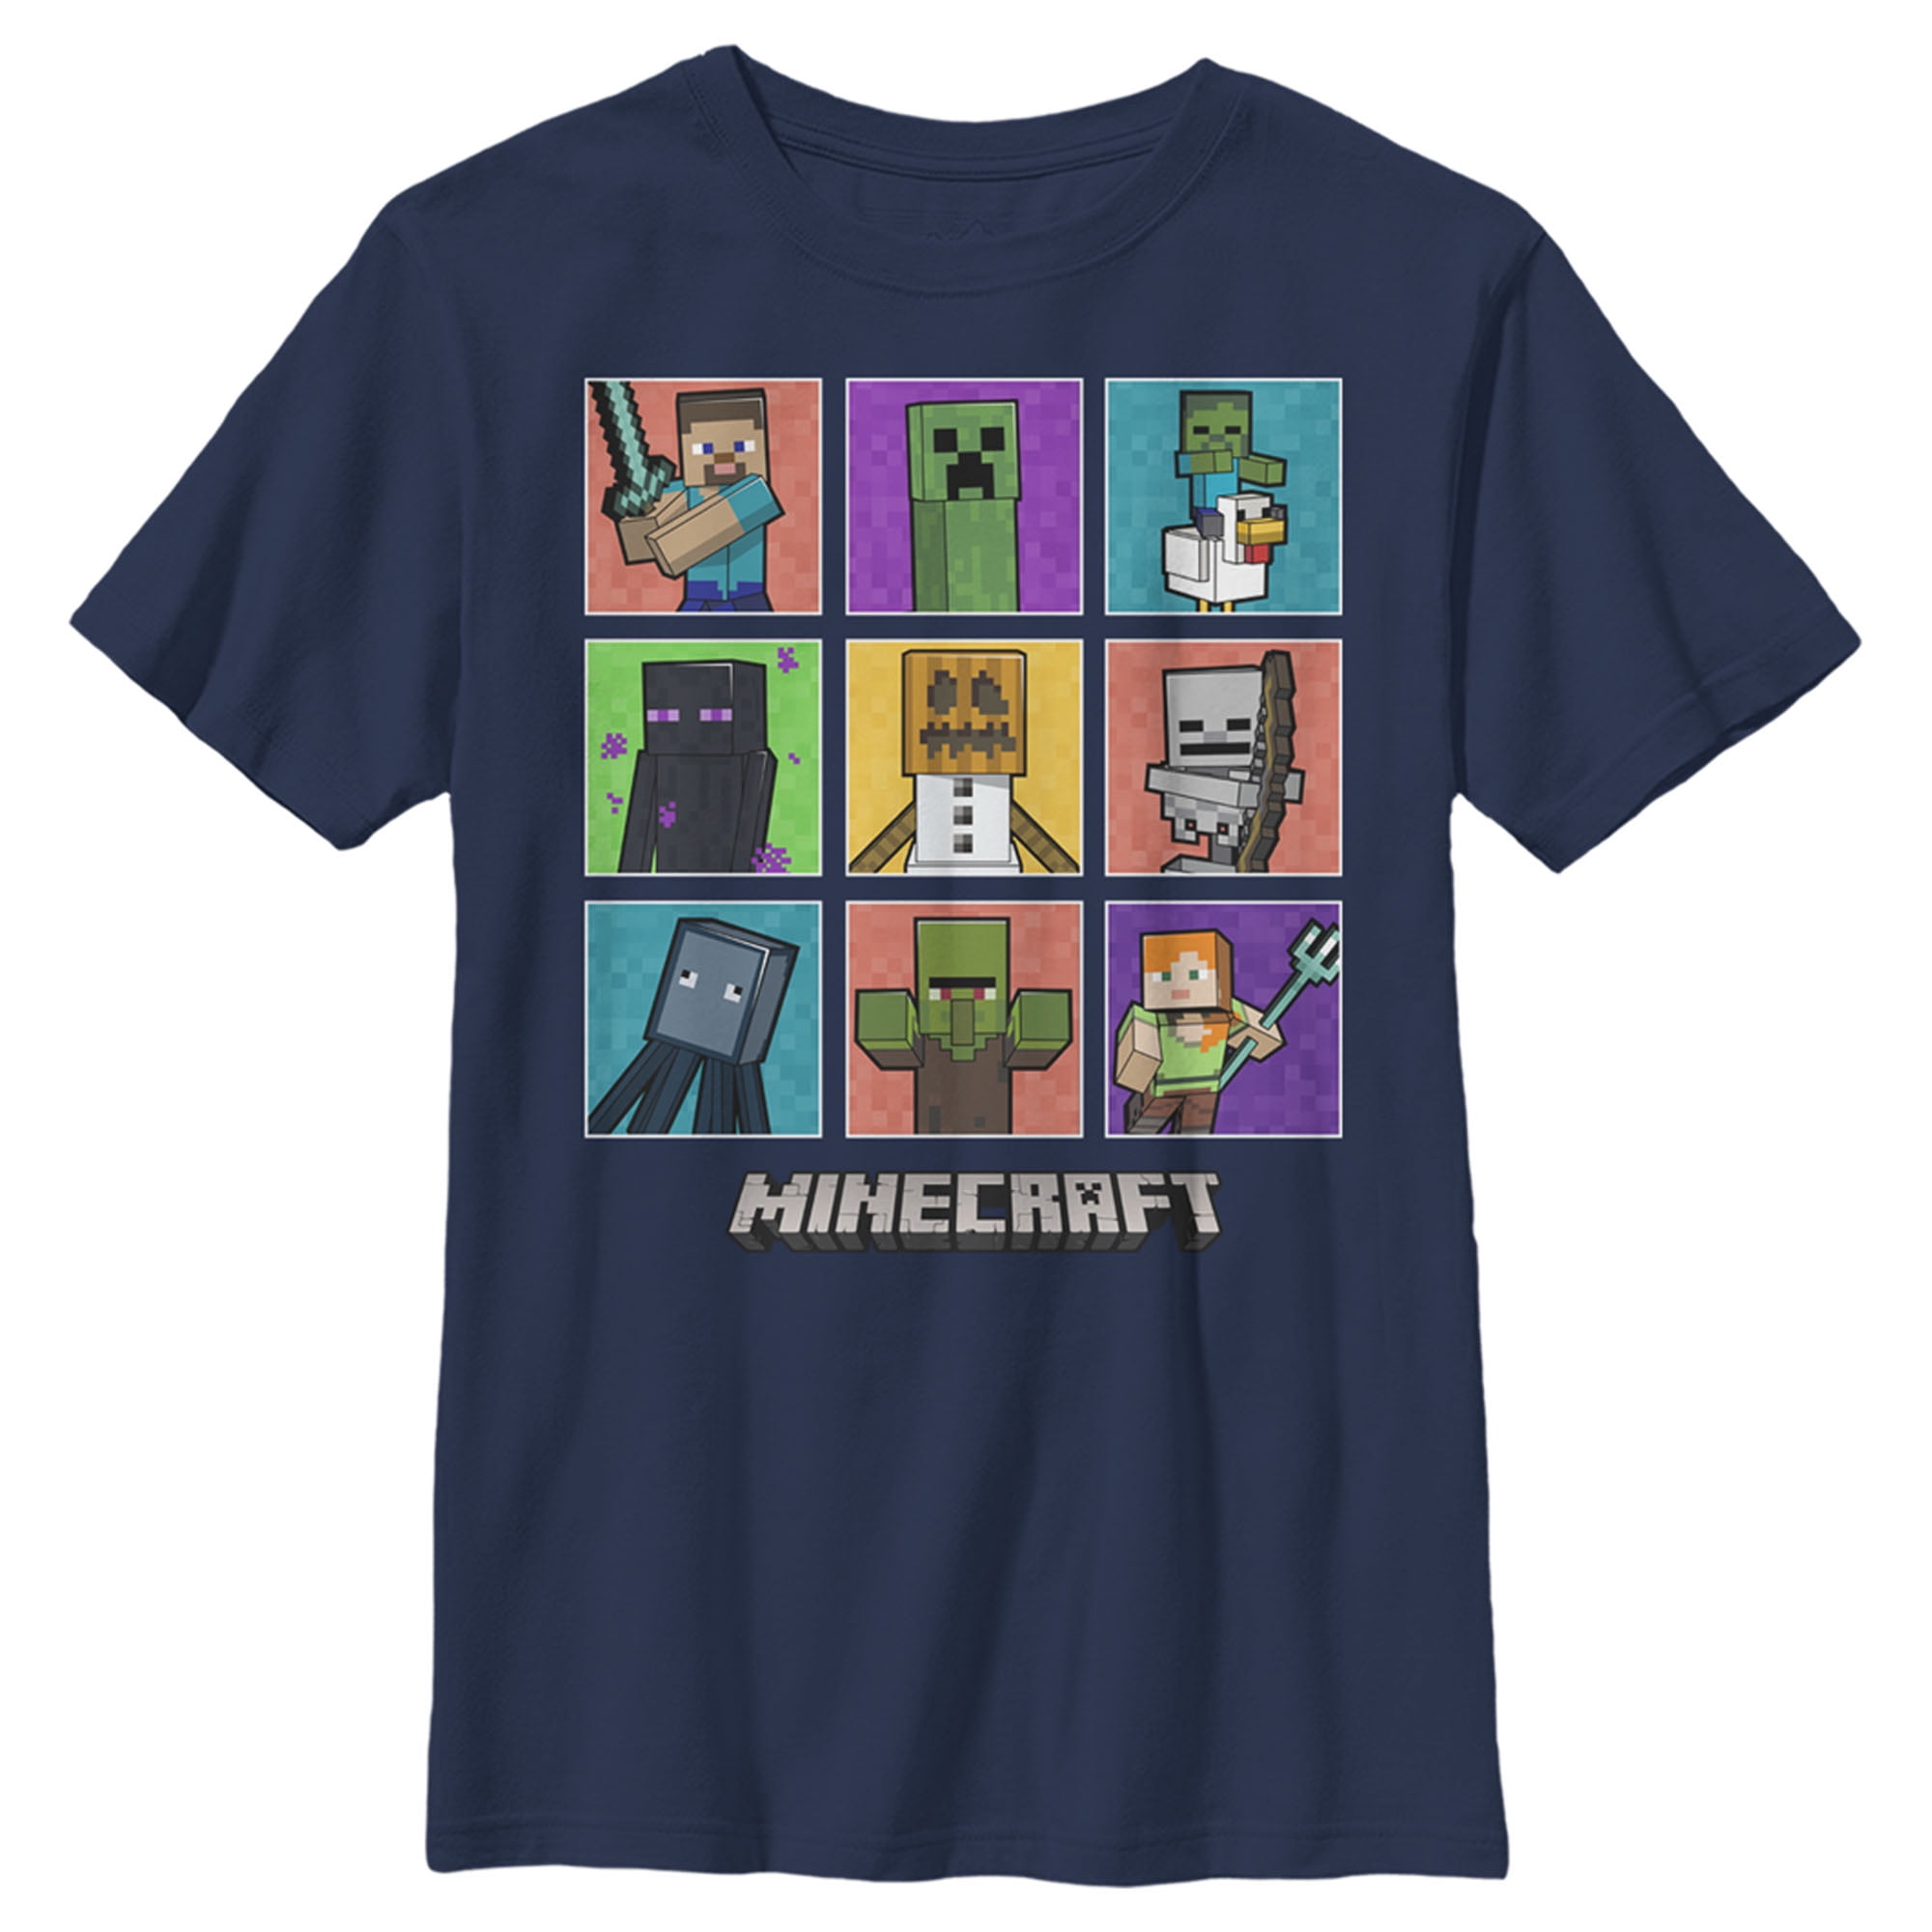 Boy's Minecraft Character Boxes Graphic Tee Navy Blue Small - Walmart.com